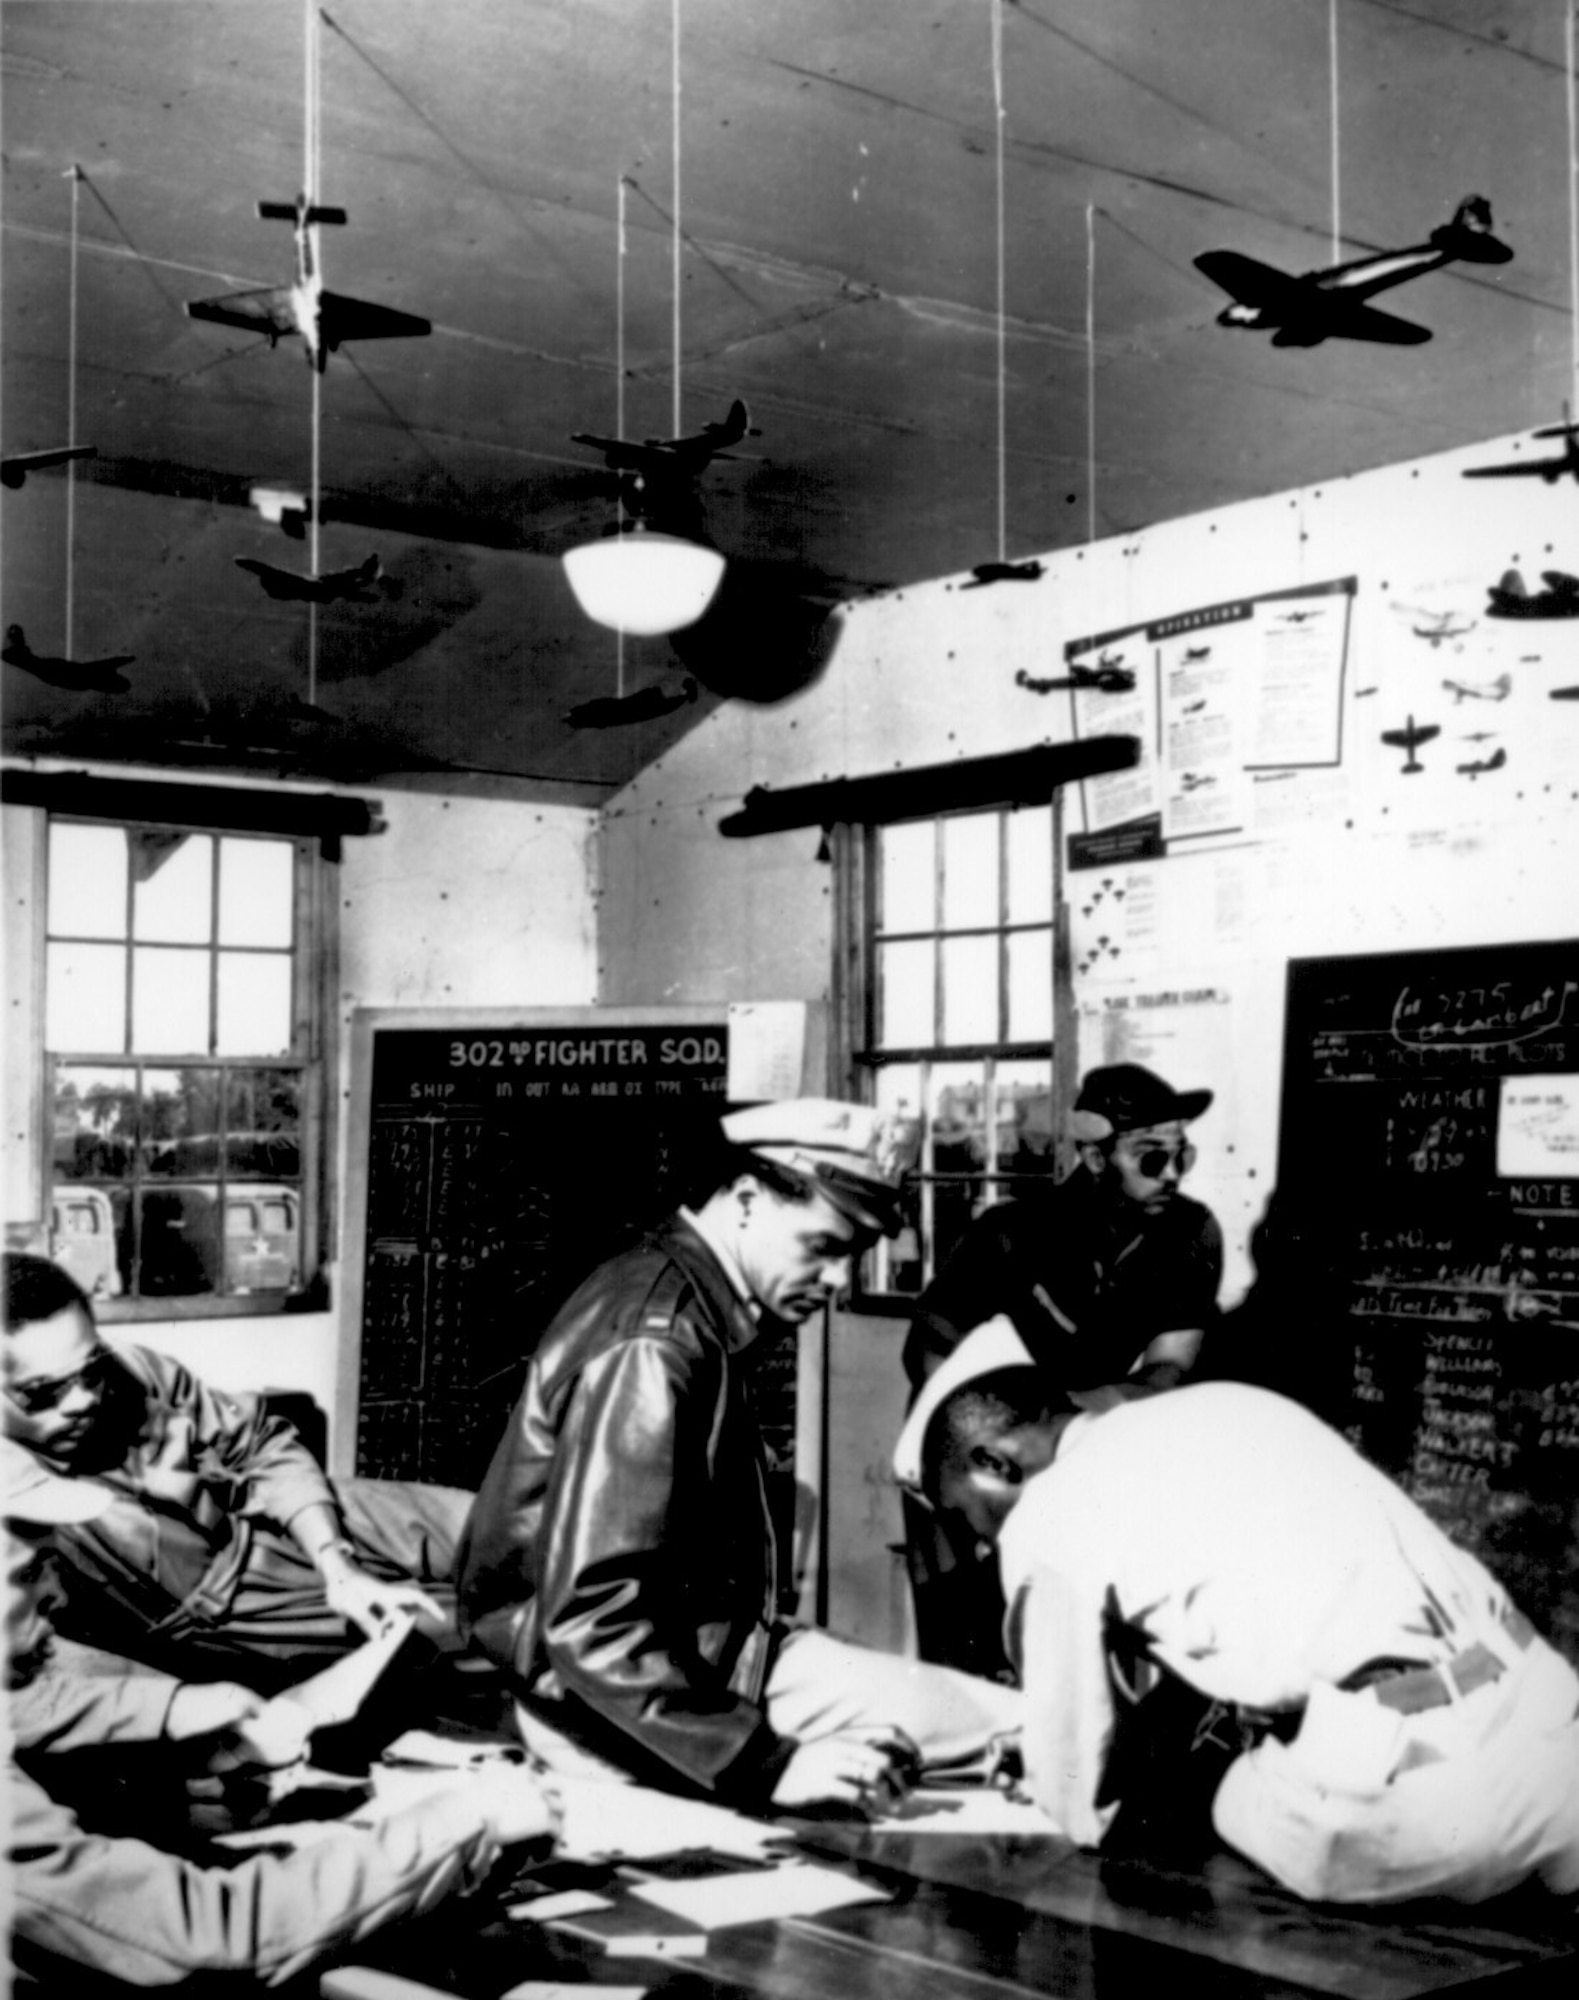 Pilots are briefed for a bombing raid during their training at Selfridge Field, Mich., 1943.